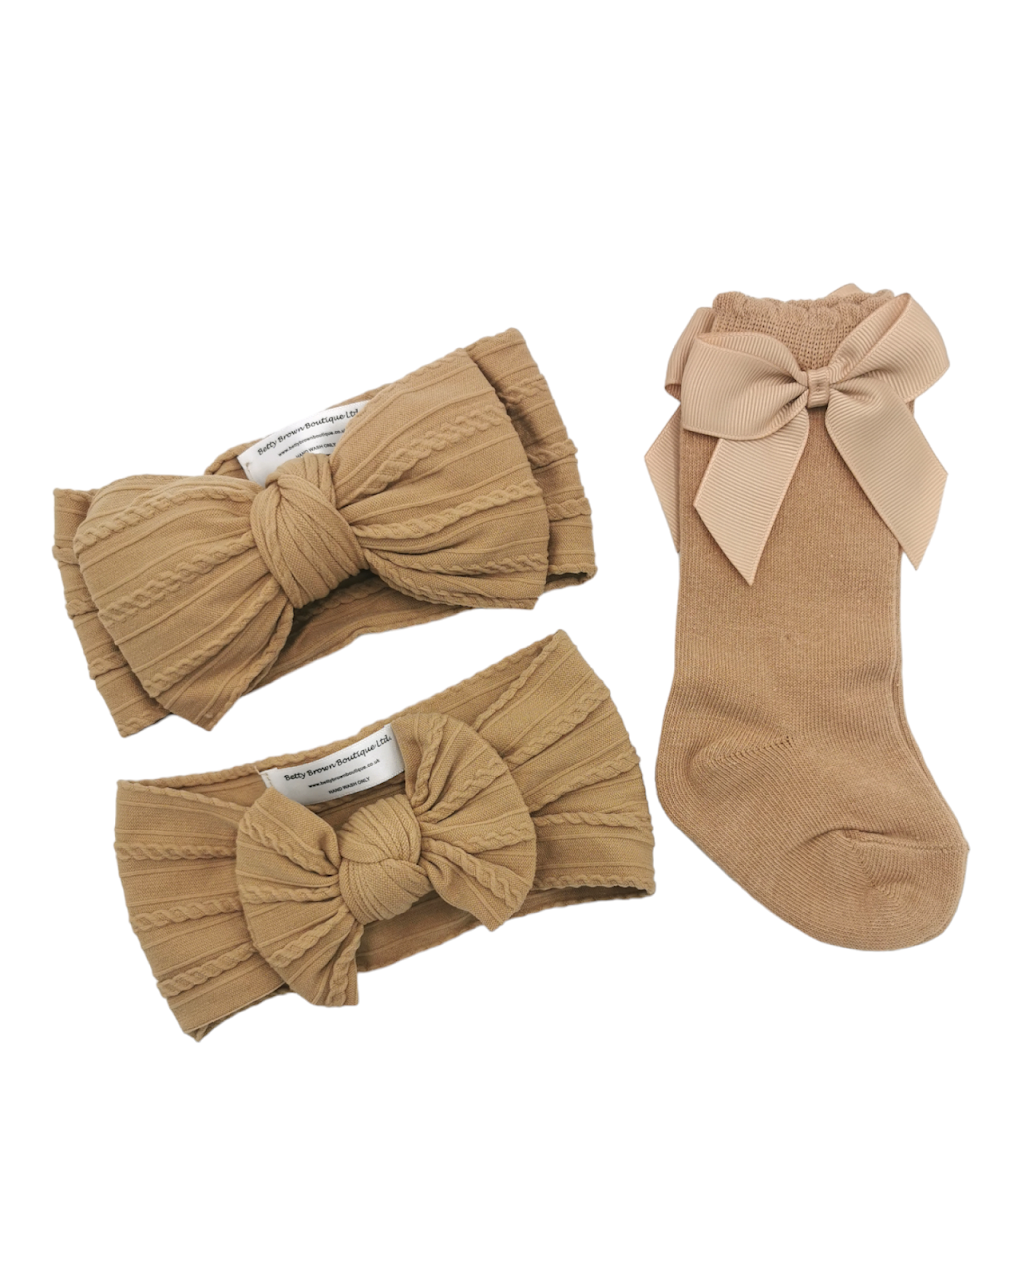 Our Coffee Larger, Smaller Headwrap & Knee High Socks Set - Betty Brown Boutique Ltd